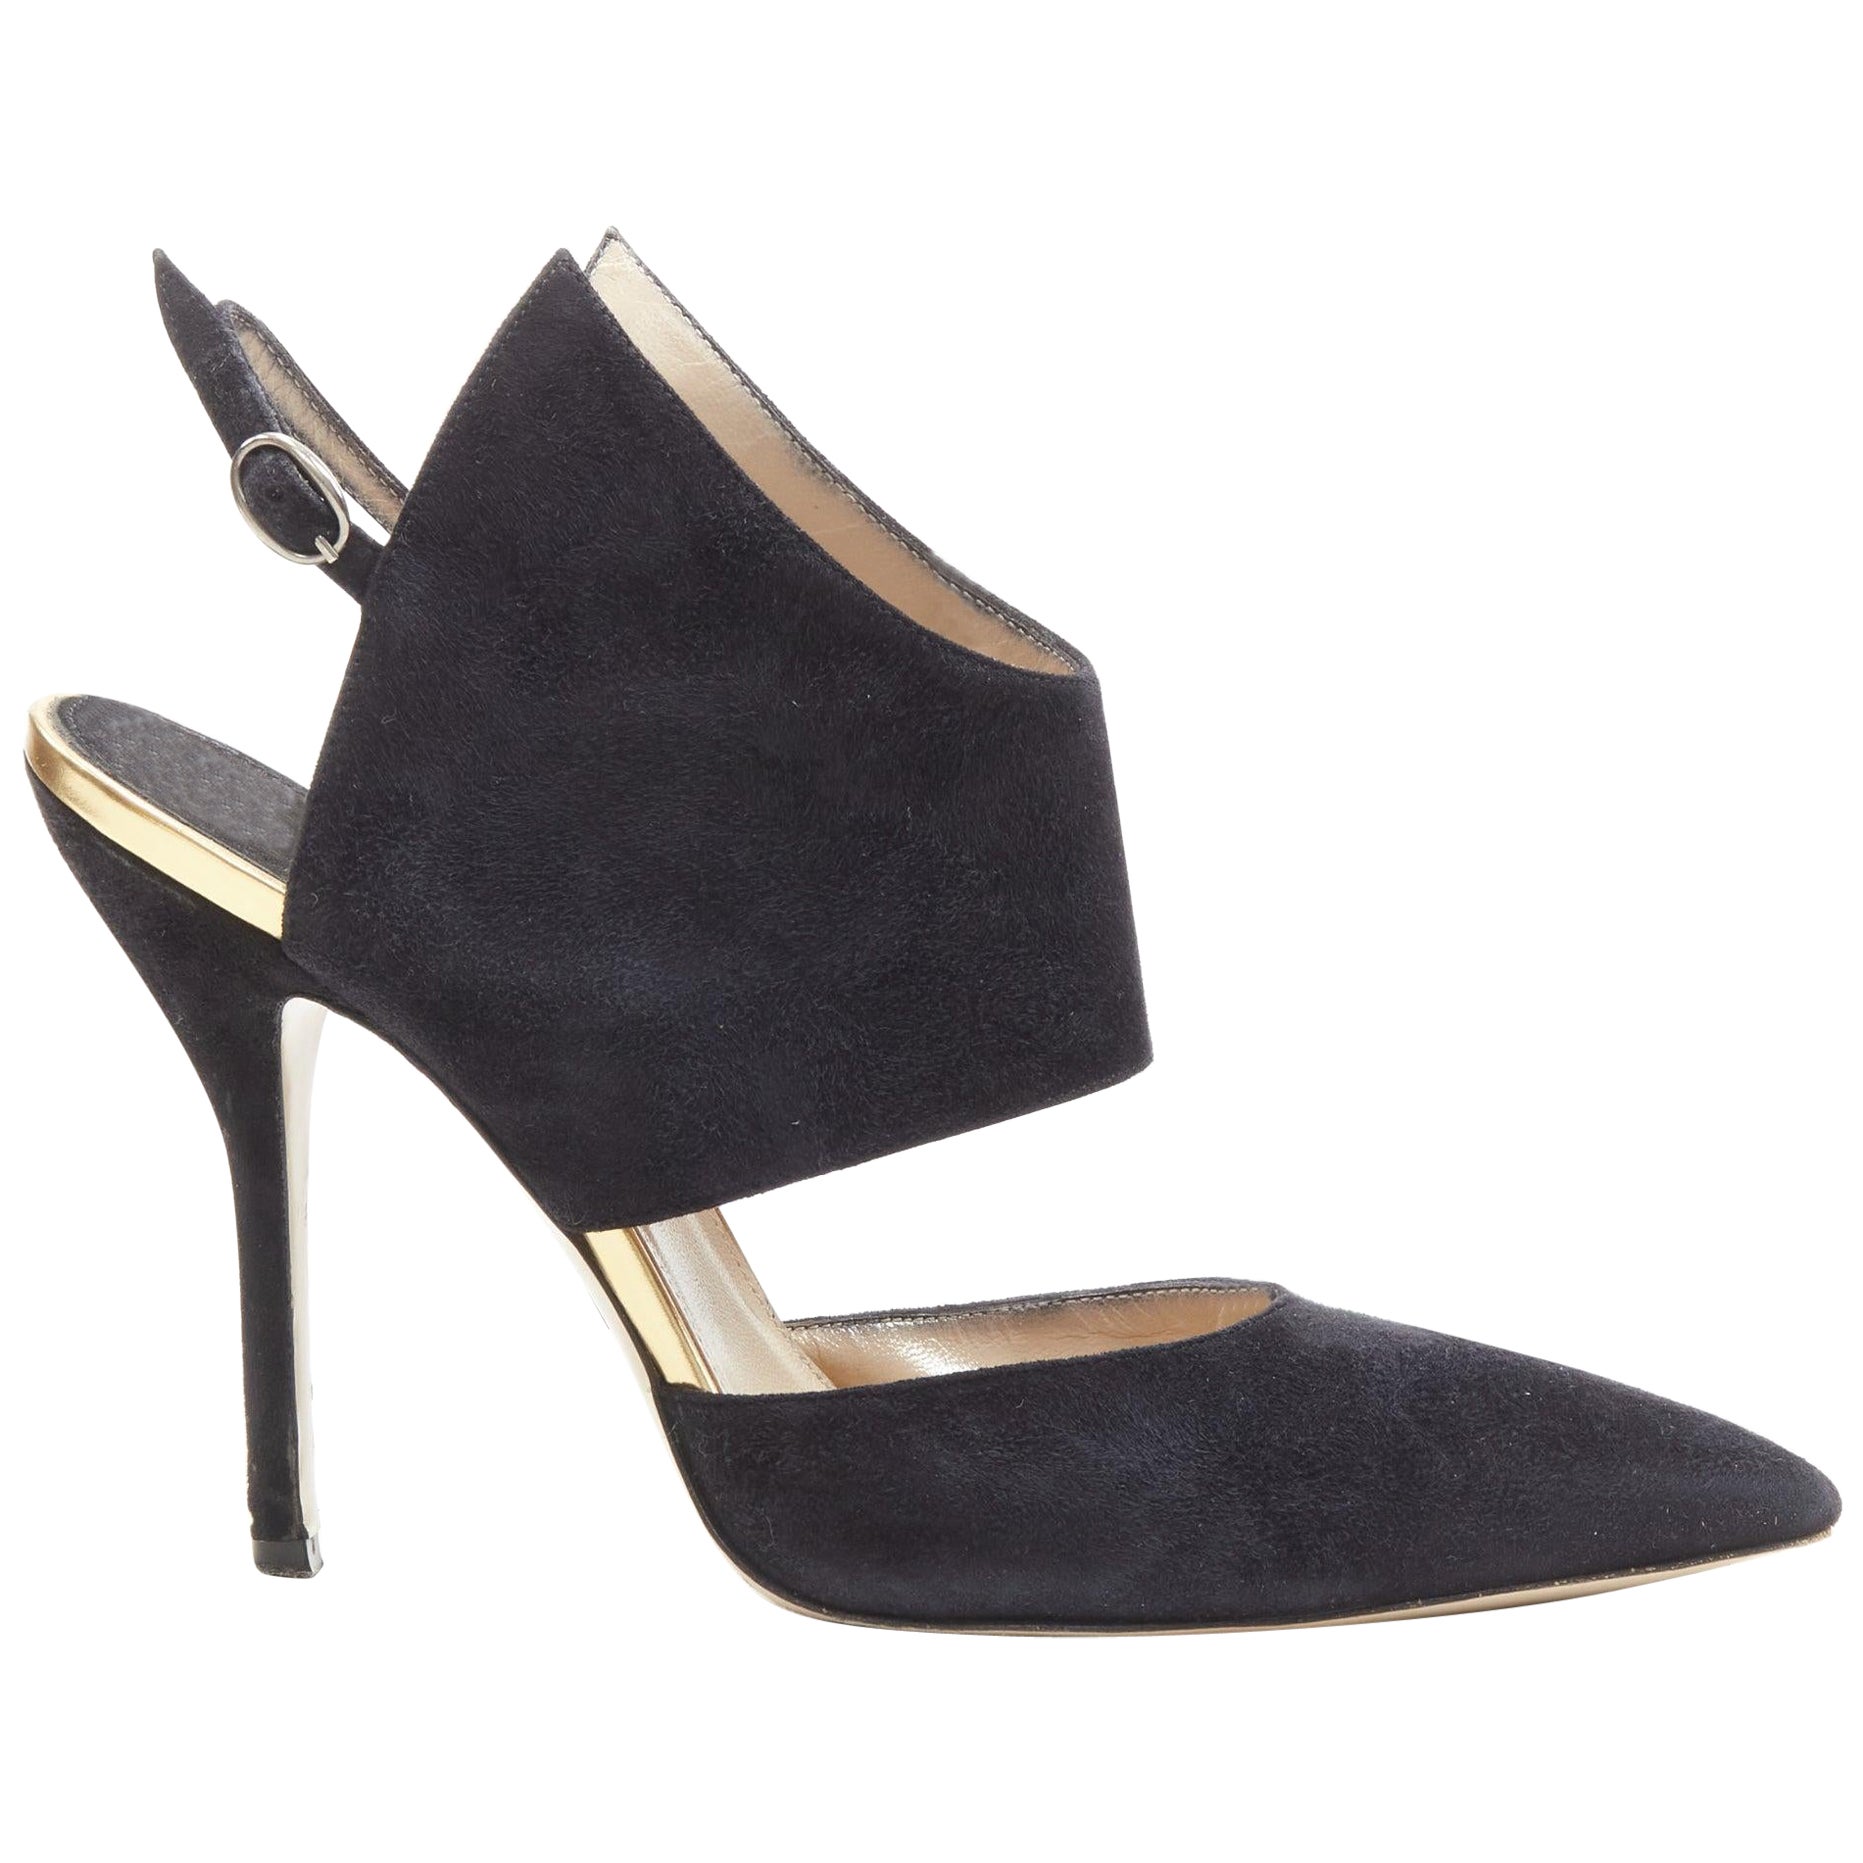 PAUL ANDREW black suede pointed winged dorsay pump EU38.5 For Sale